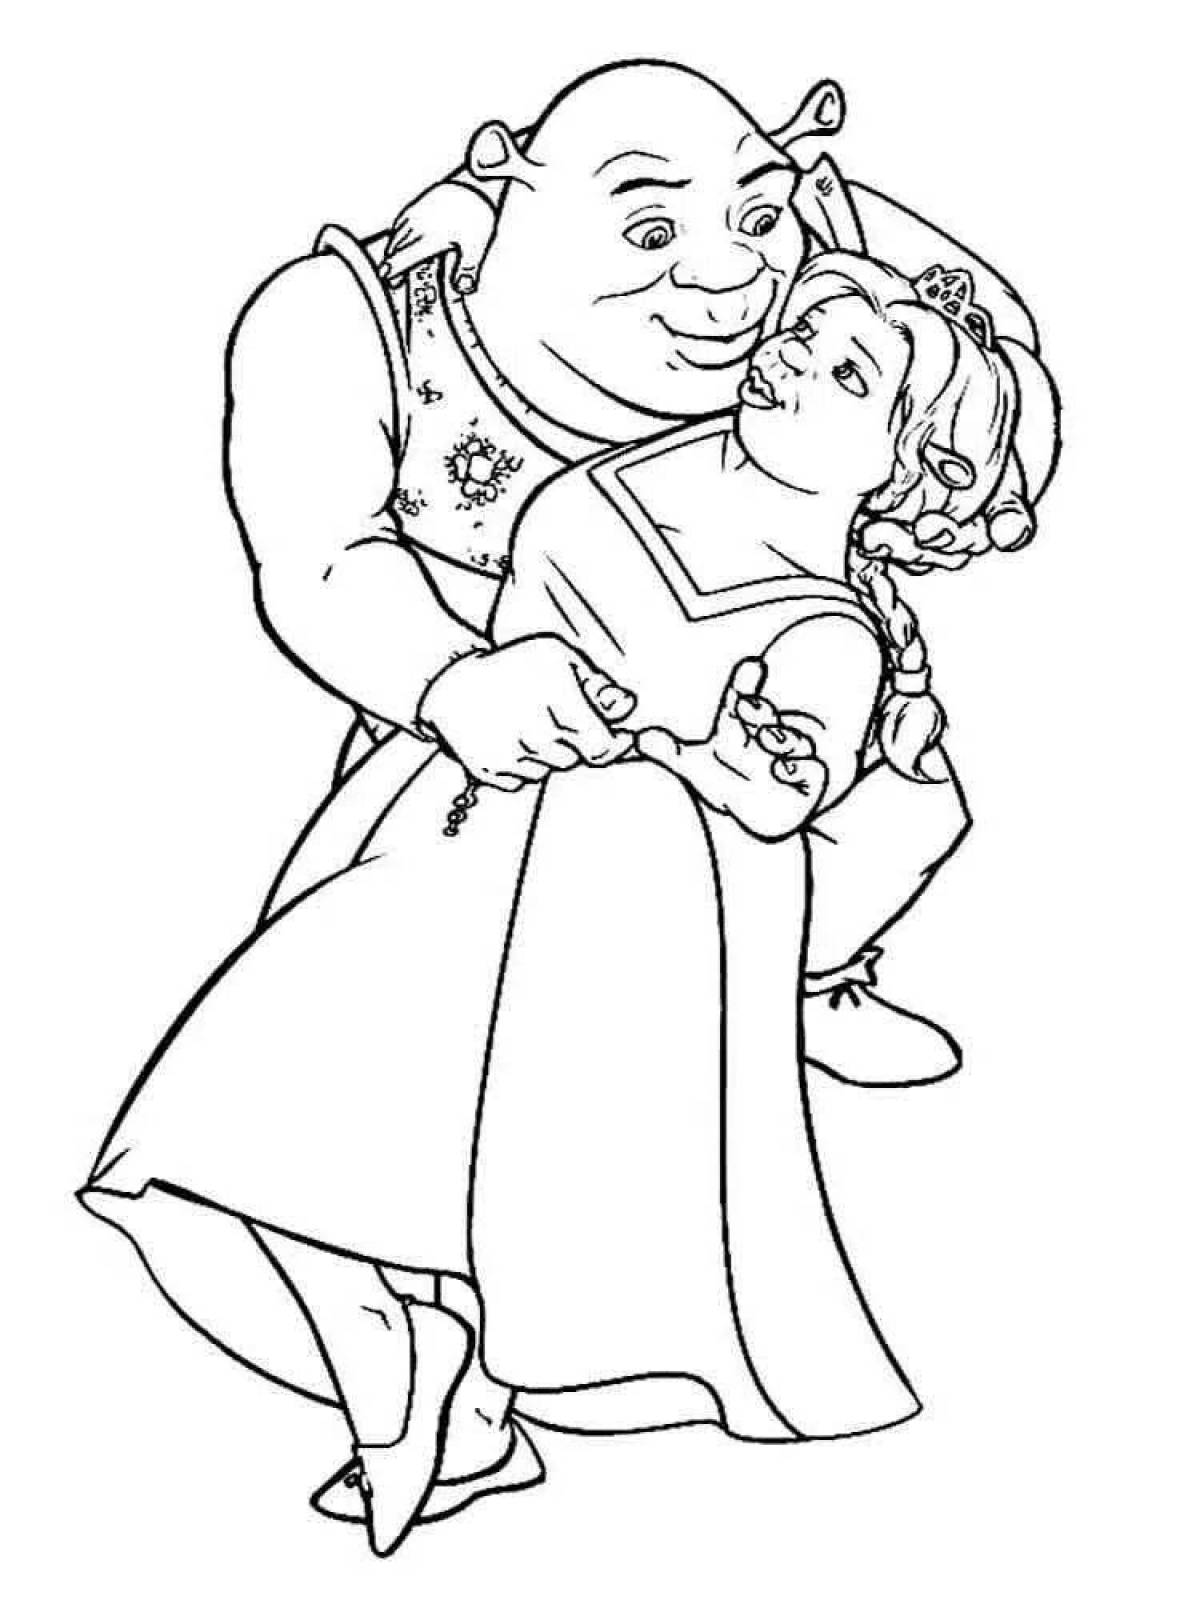 Charming Shrek and Fiona coloring book